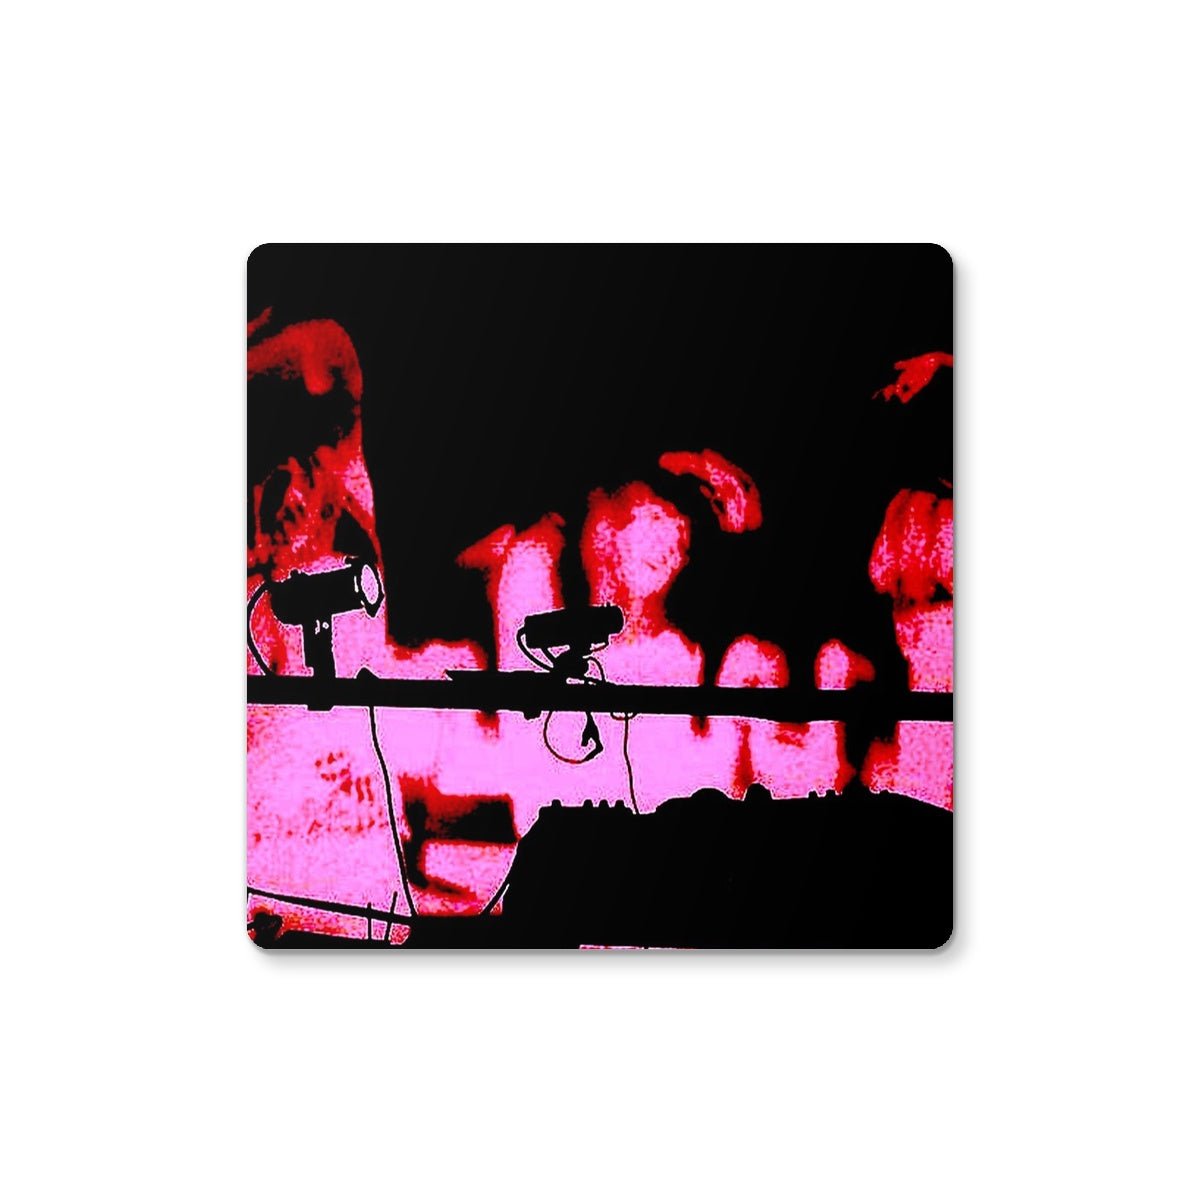 Dancing With The Devils Art Gifts Coaster-Coasters-Abstract & Impressionistic Art Gallery-4 Coasters-Paintings, Prints, Homeware, Art Gifts From Scotland By Scottish Artist Kevin Hunter